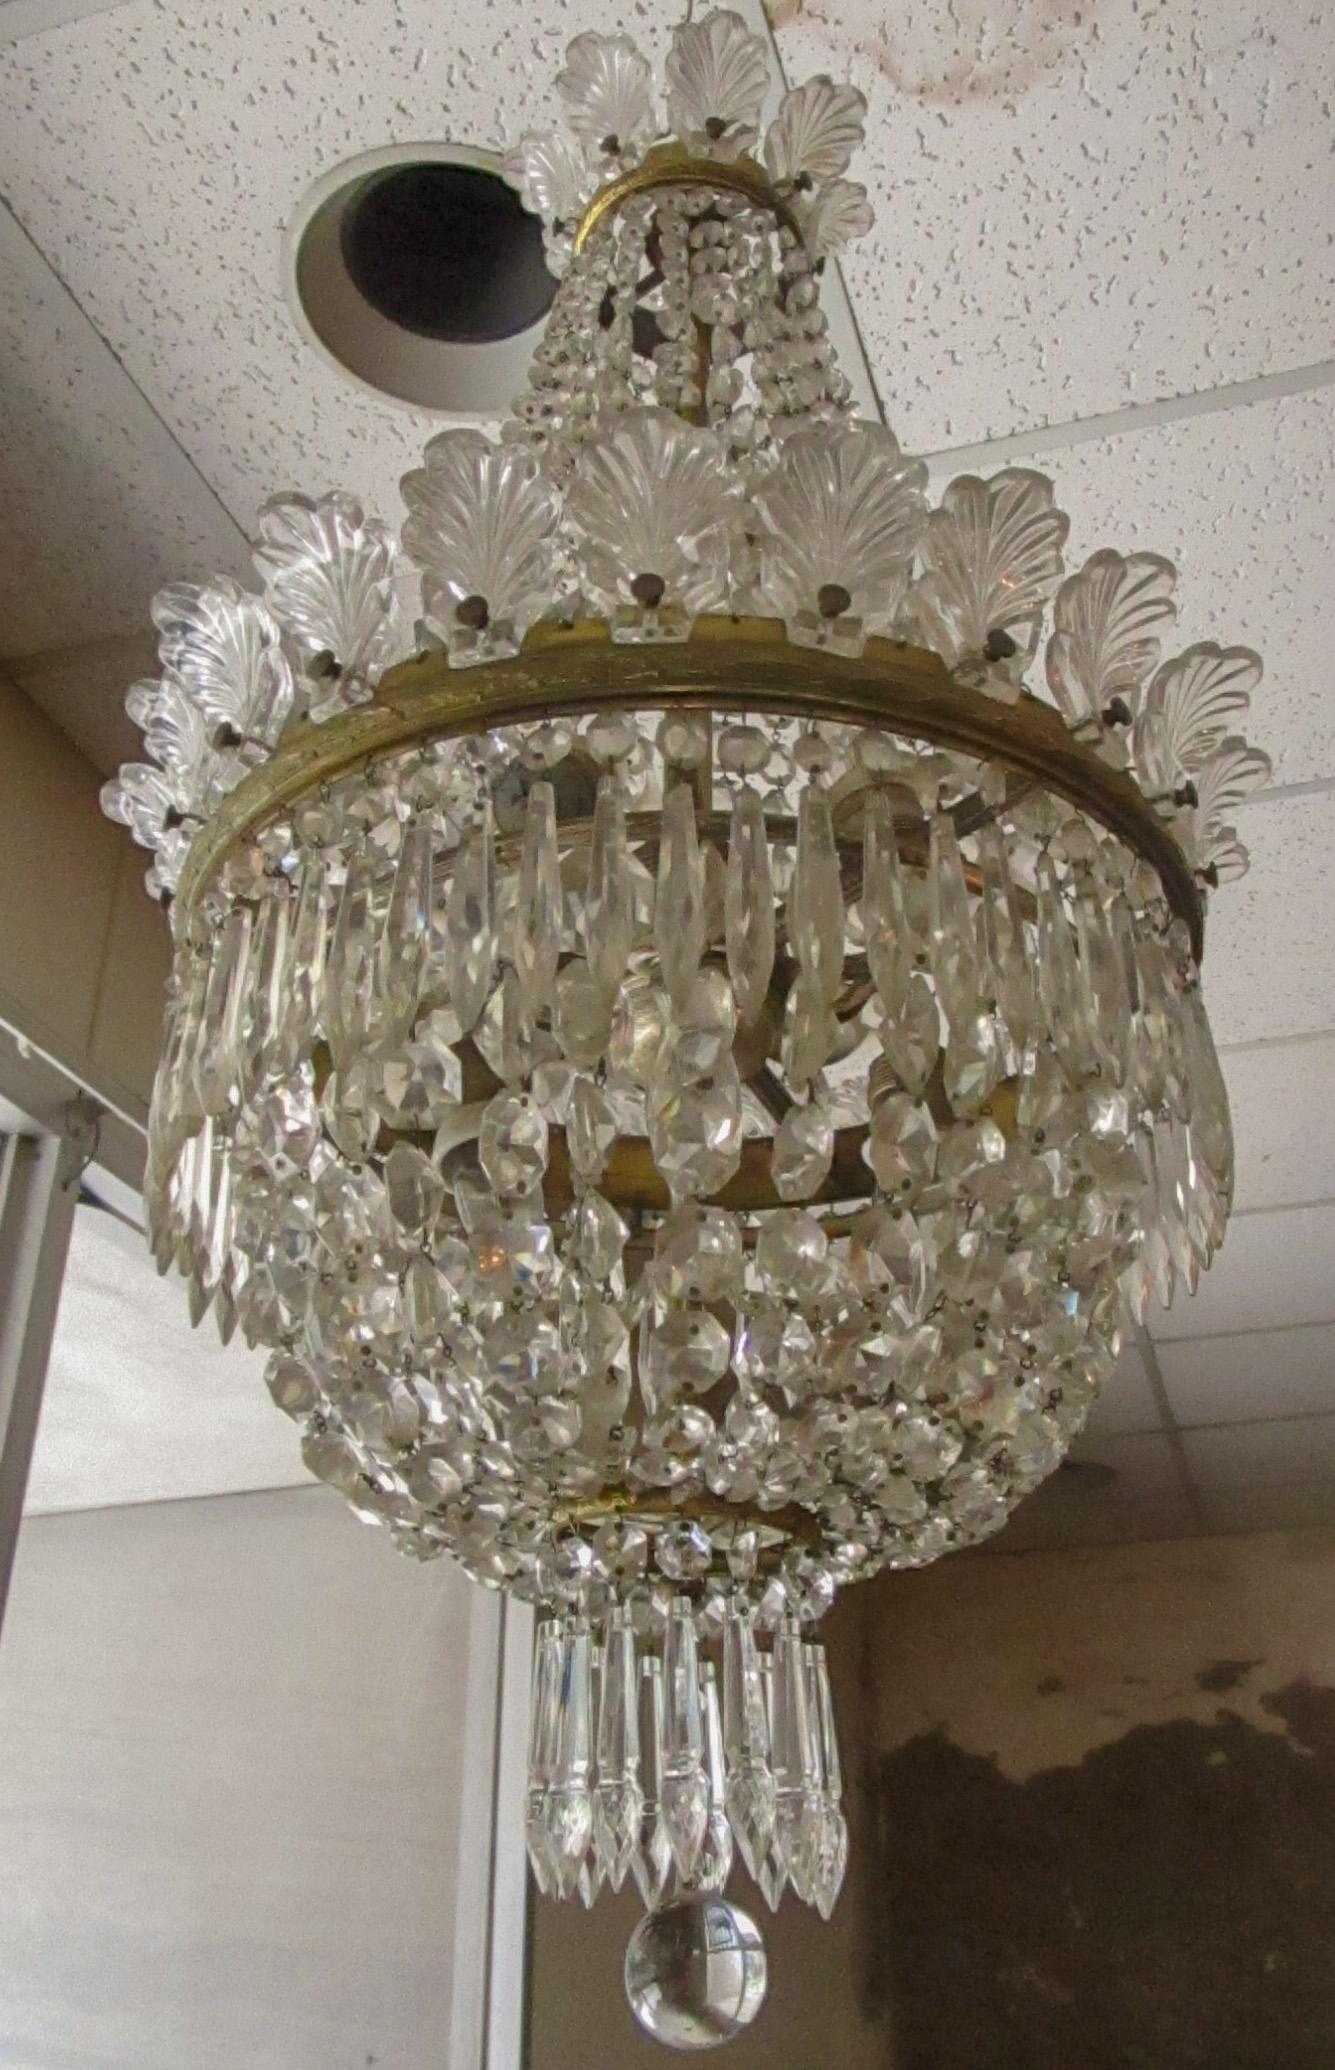 This gorgeous Hollywood Regency chandelier might have been used by renowned designers Dorothy Draper and Billy Haines. Featuring an elegant elongated shape, highlights include sparkling teardrop prisms, beaded festoons, double crowns of shell shaped